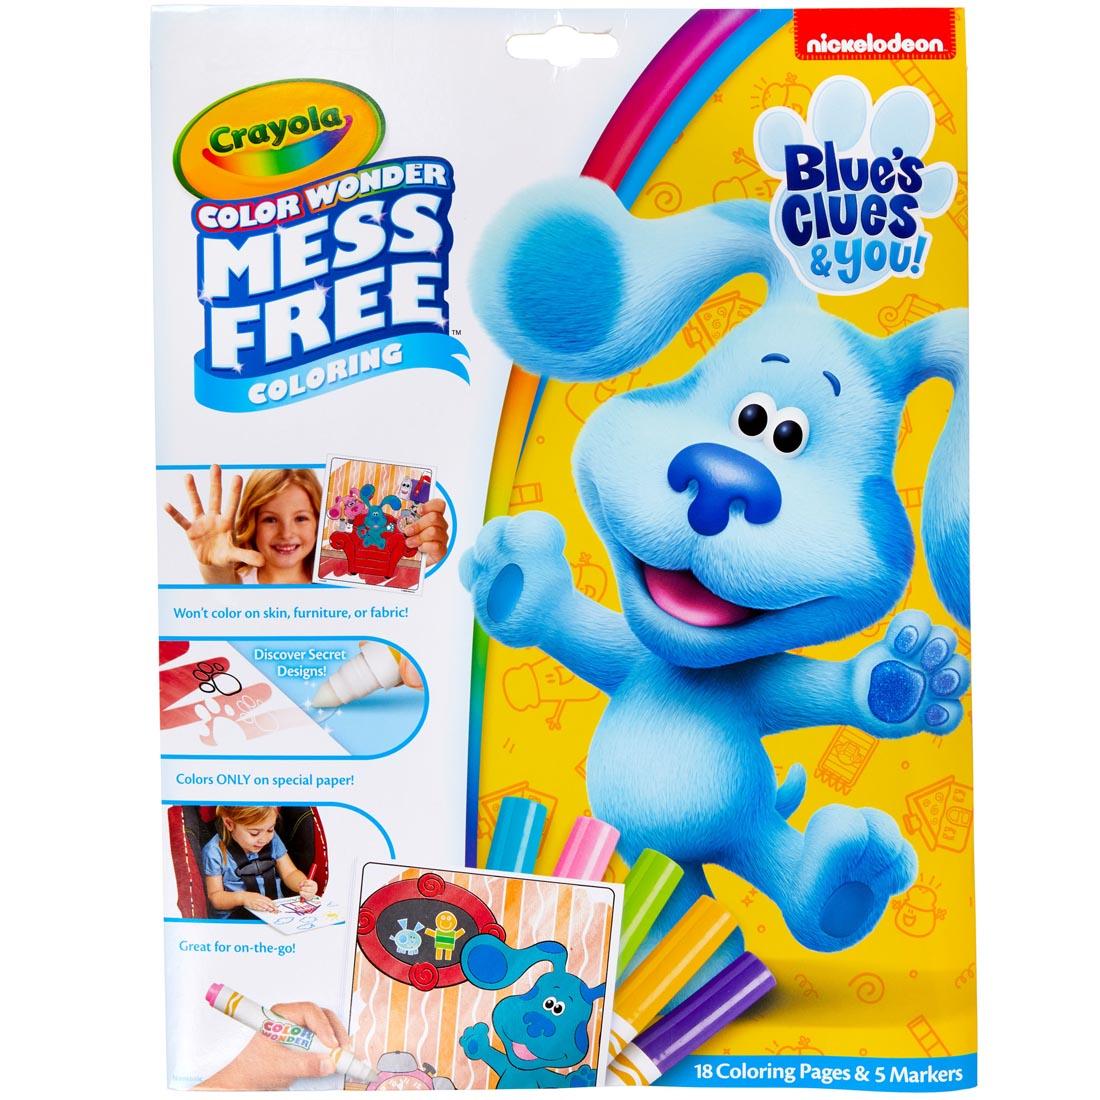 Package of Crayola Color Wonder Mess Free Blue's Clues & You Coloring Set